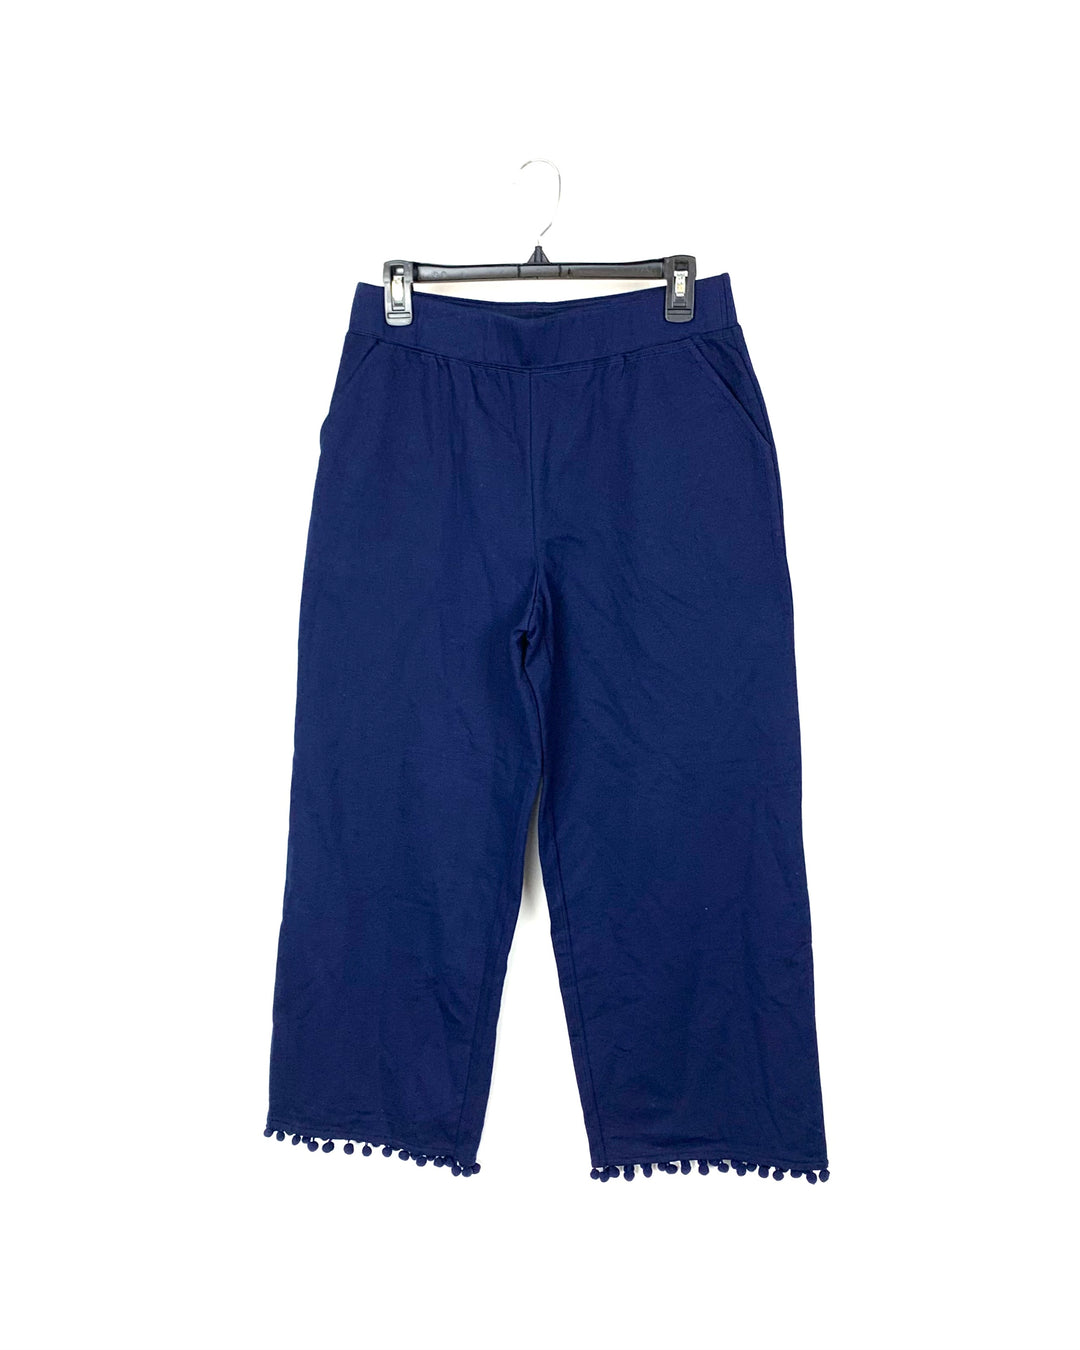 Navy Blue Cropped Pants With Pom Poms - Small and Large